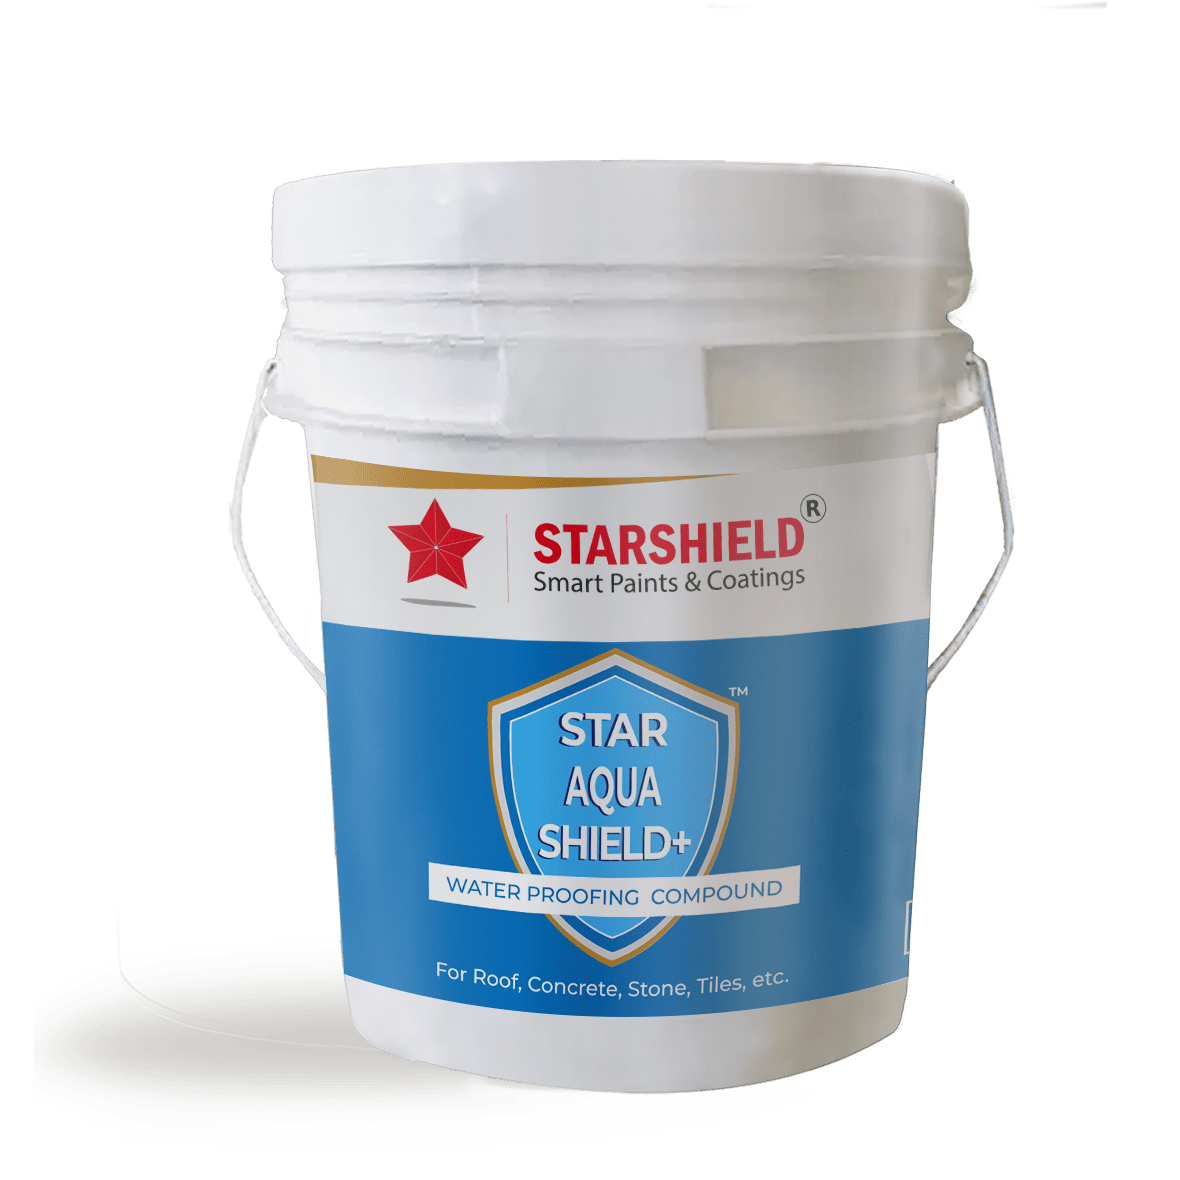 Say goodbye to leaks with Star Aqua Shield +. Best roof waterproofing products in India at competitive prices.